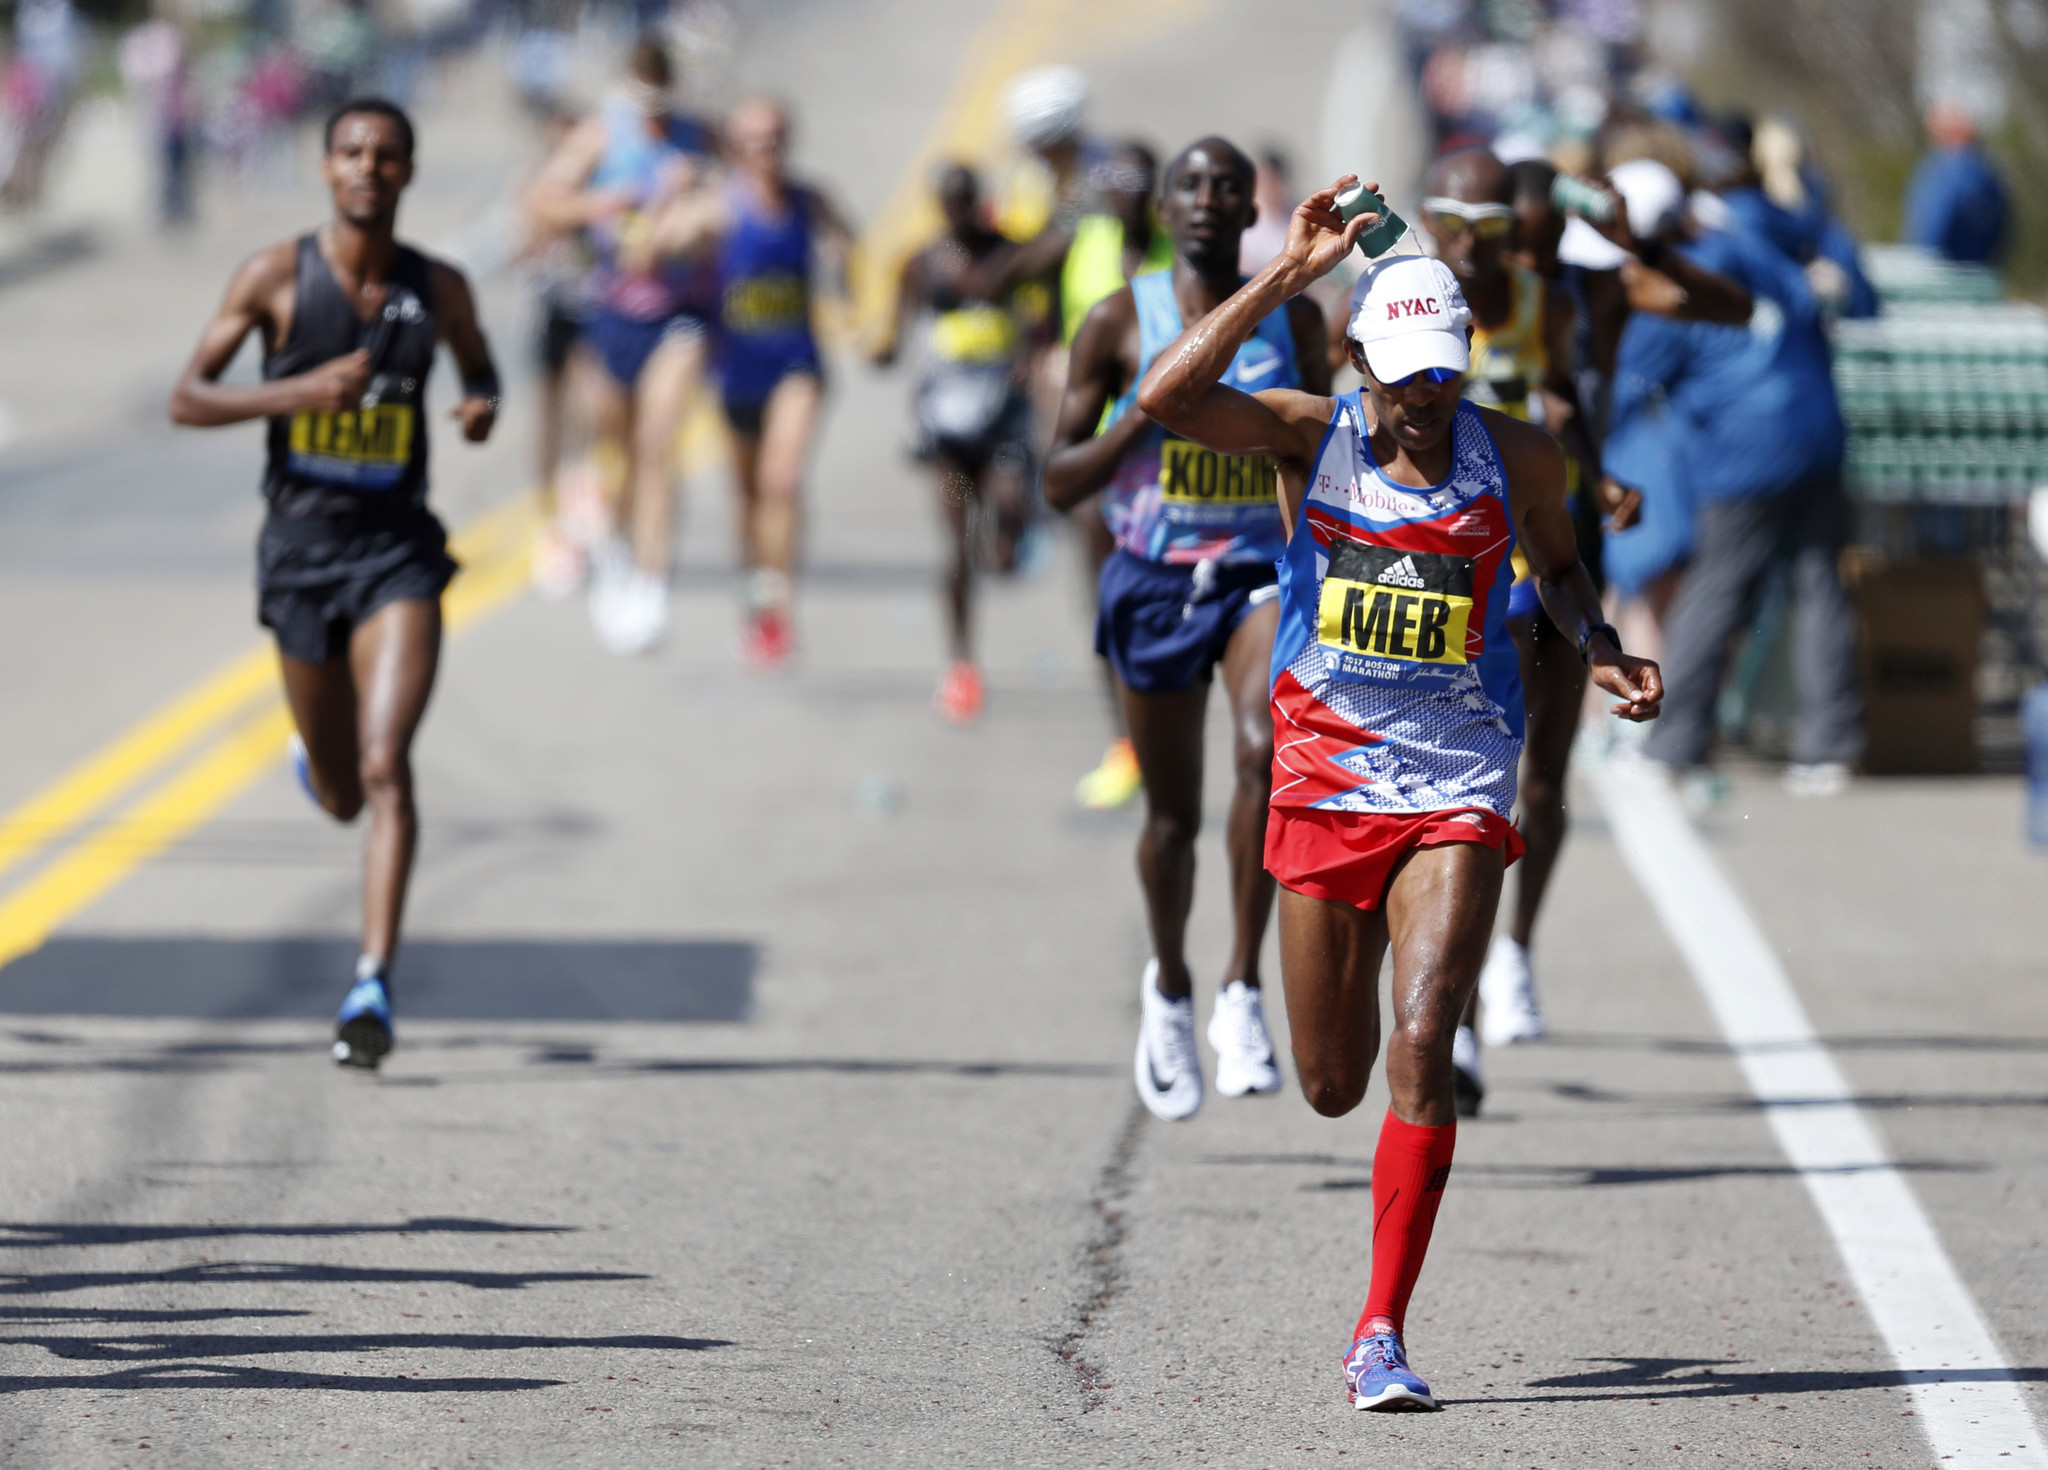 Olympian Meb Keflezighi will participate in Tallahassee Half Marathon this weekend